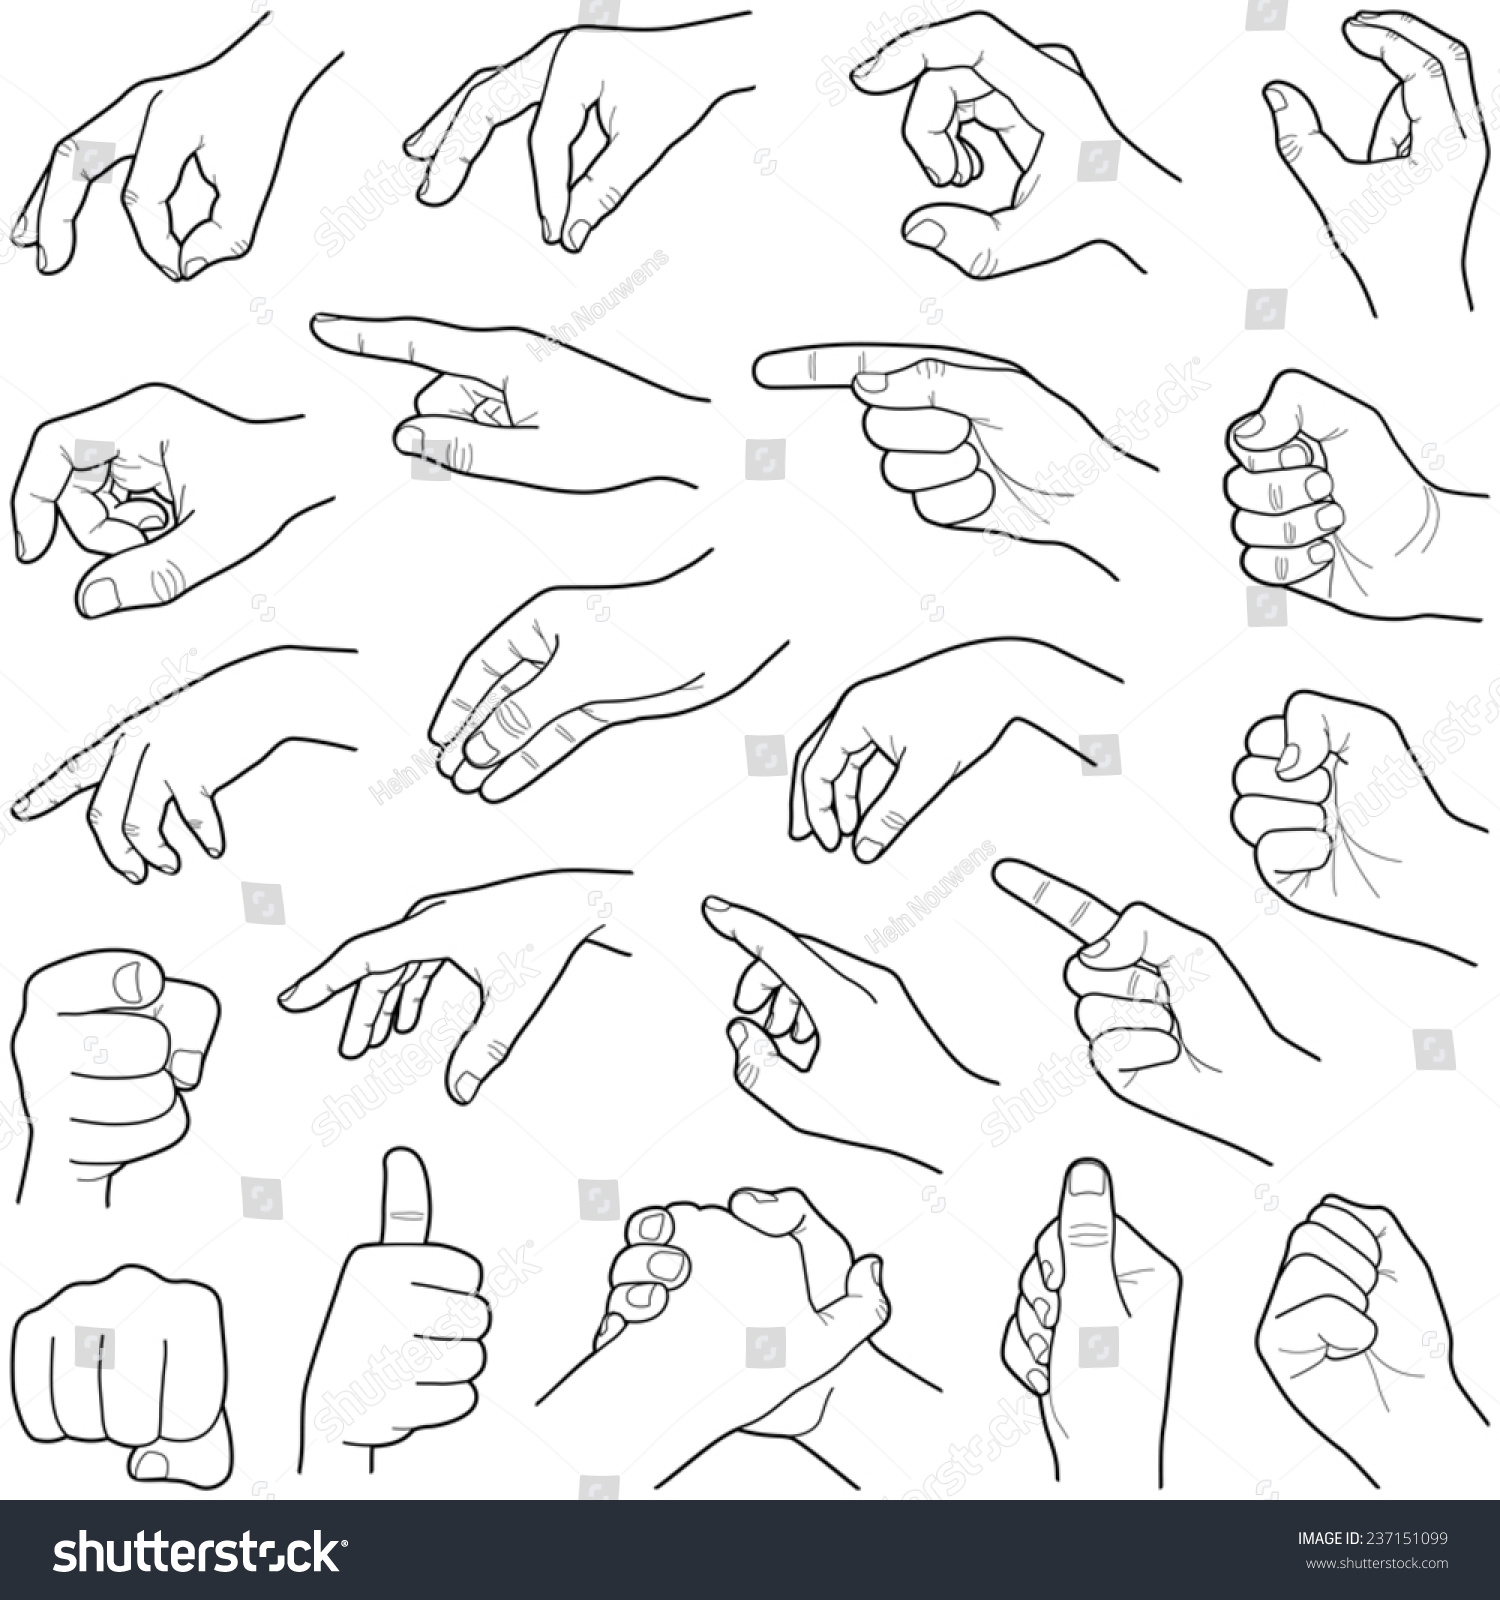 Hand Collection - Vector Line Illustration - 237151099 : Shutterstock